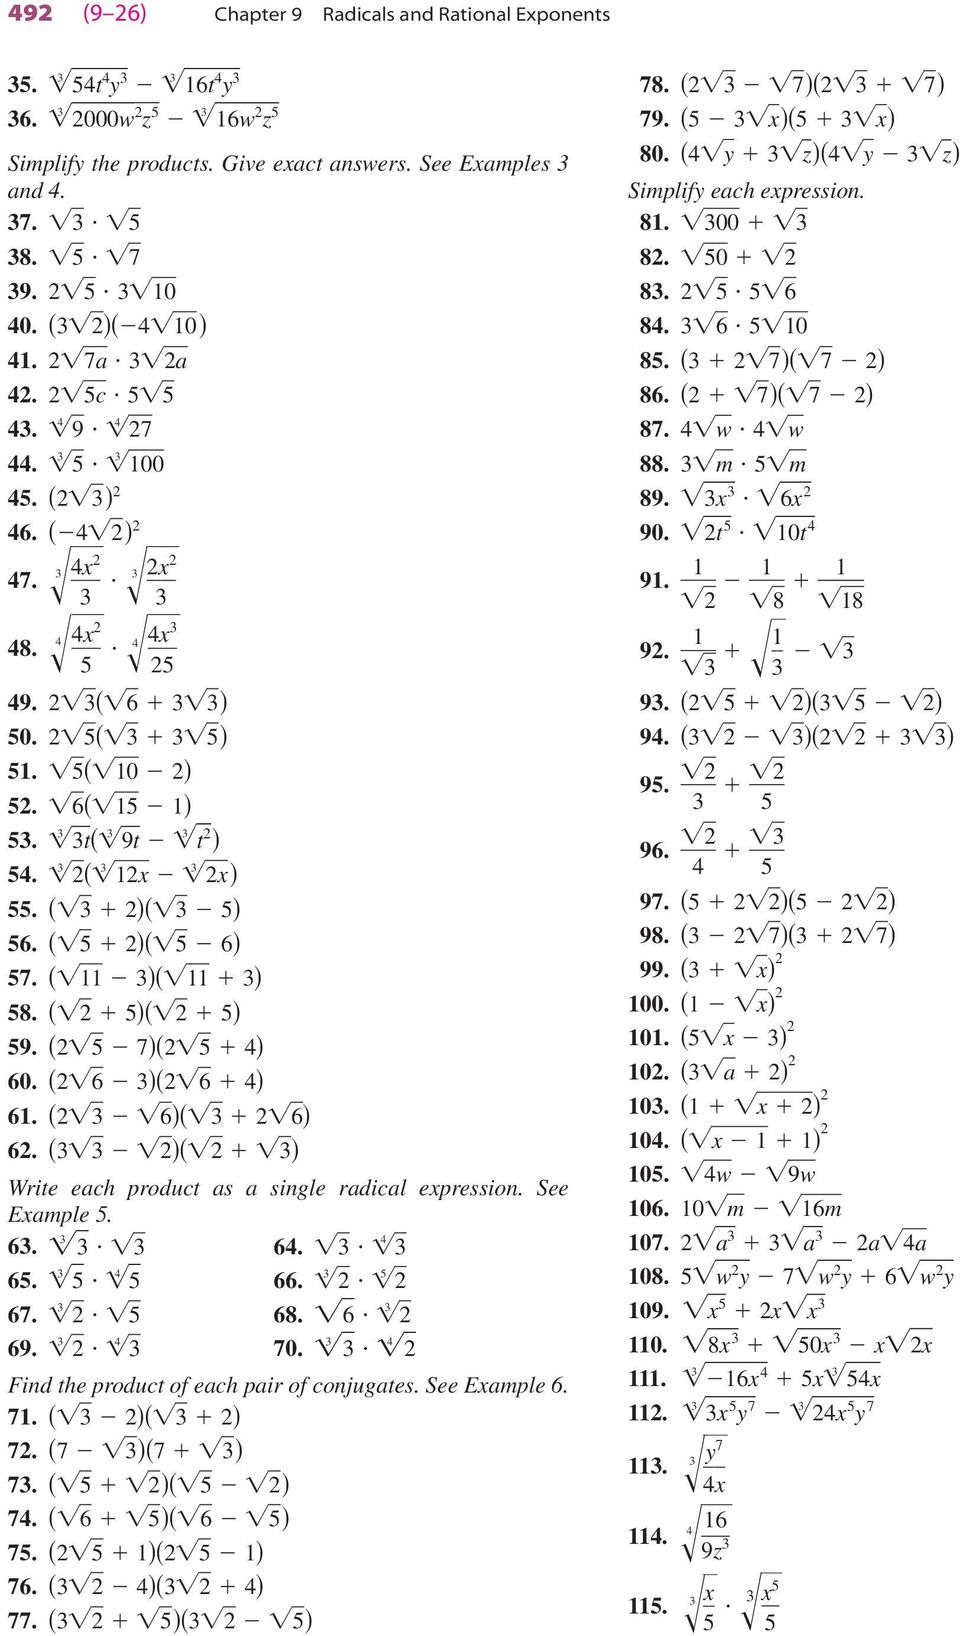 67. 68. 6 69. 70. Find the product of each pair of conjugates. See Eample 6. 71. ( )( ) 7. (7 )(7 ) 7. ( )( ) 7. (6 )(6 ) 7. ( 1)( 1) 76. ( )( ) 77. ( )( ) 78. ( 7)( 7) 79. ( )( ) 80.